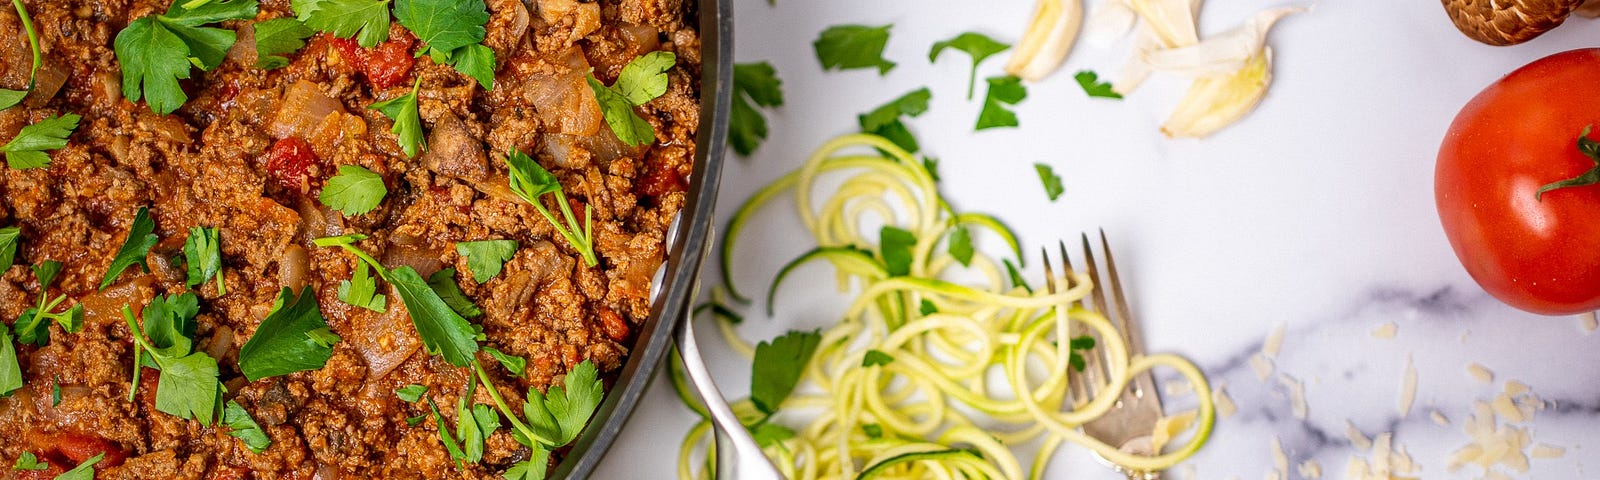 A large pan of cooked ground beef surrounded by garlic, zucchini, tomatoes, and parmesan cheese.